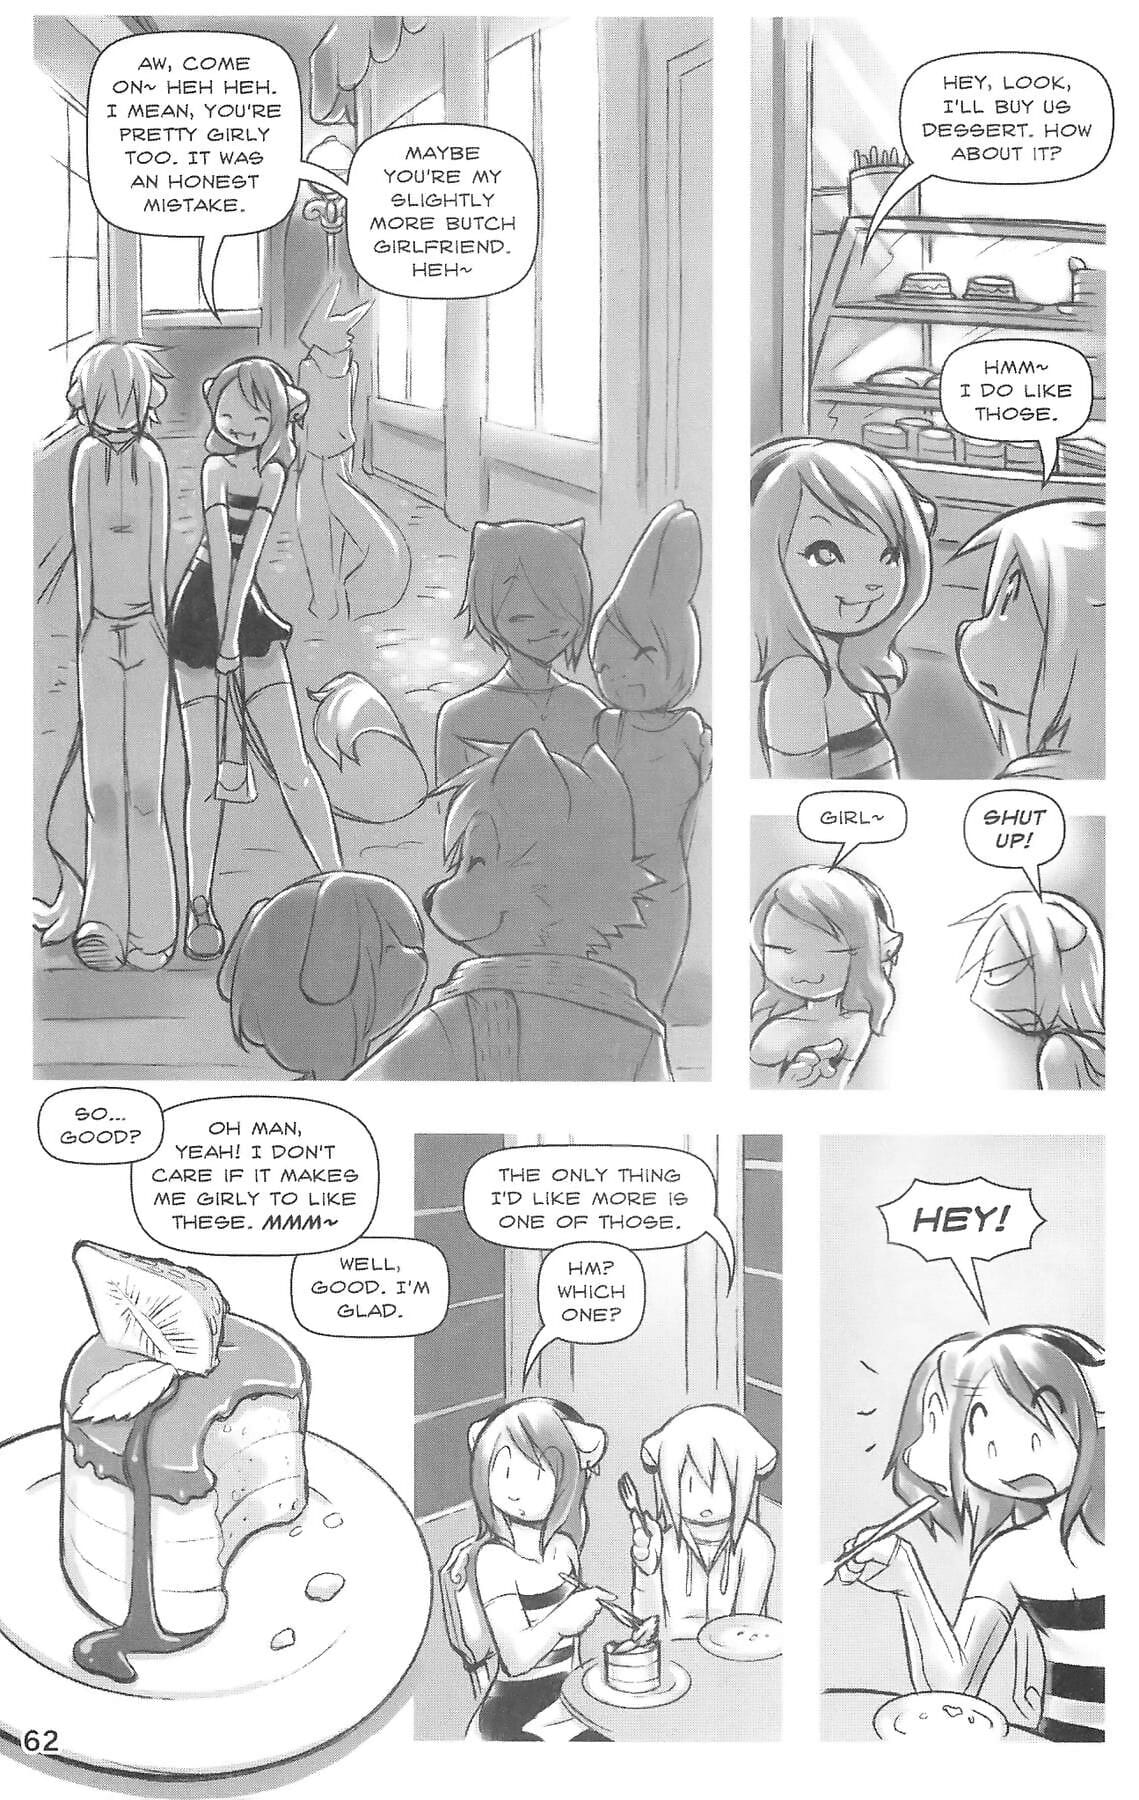 Charming page 1